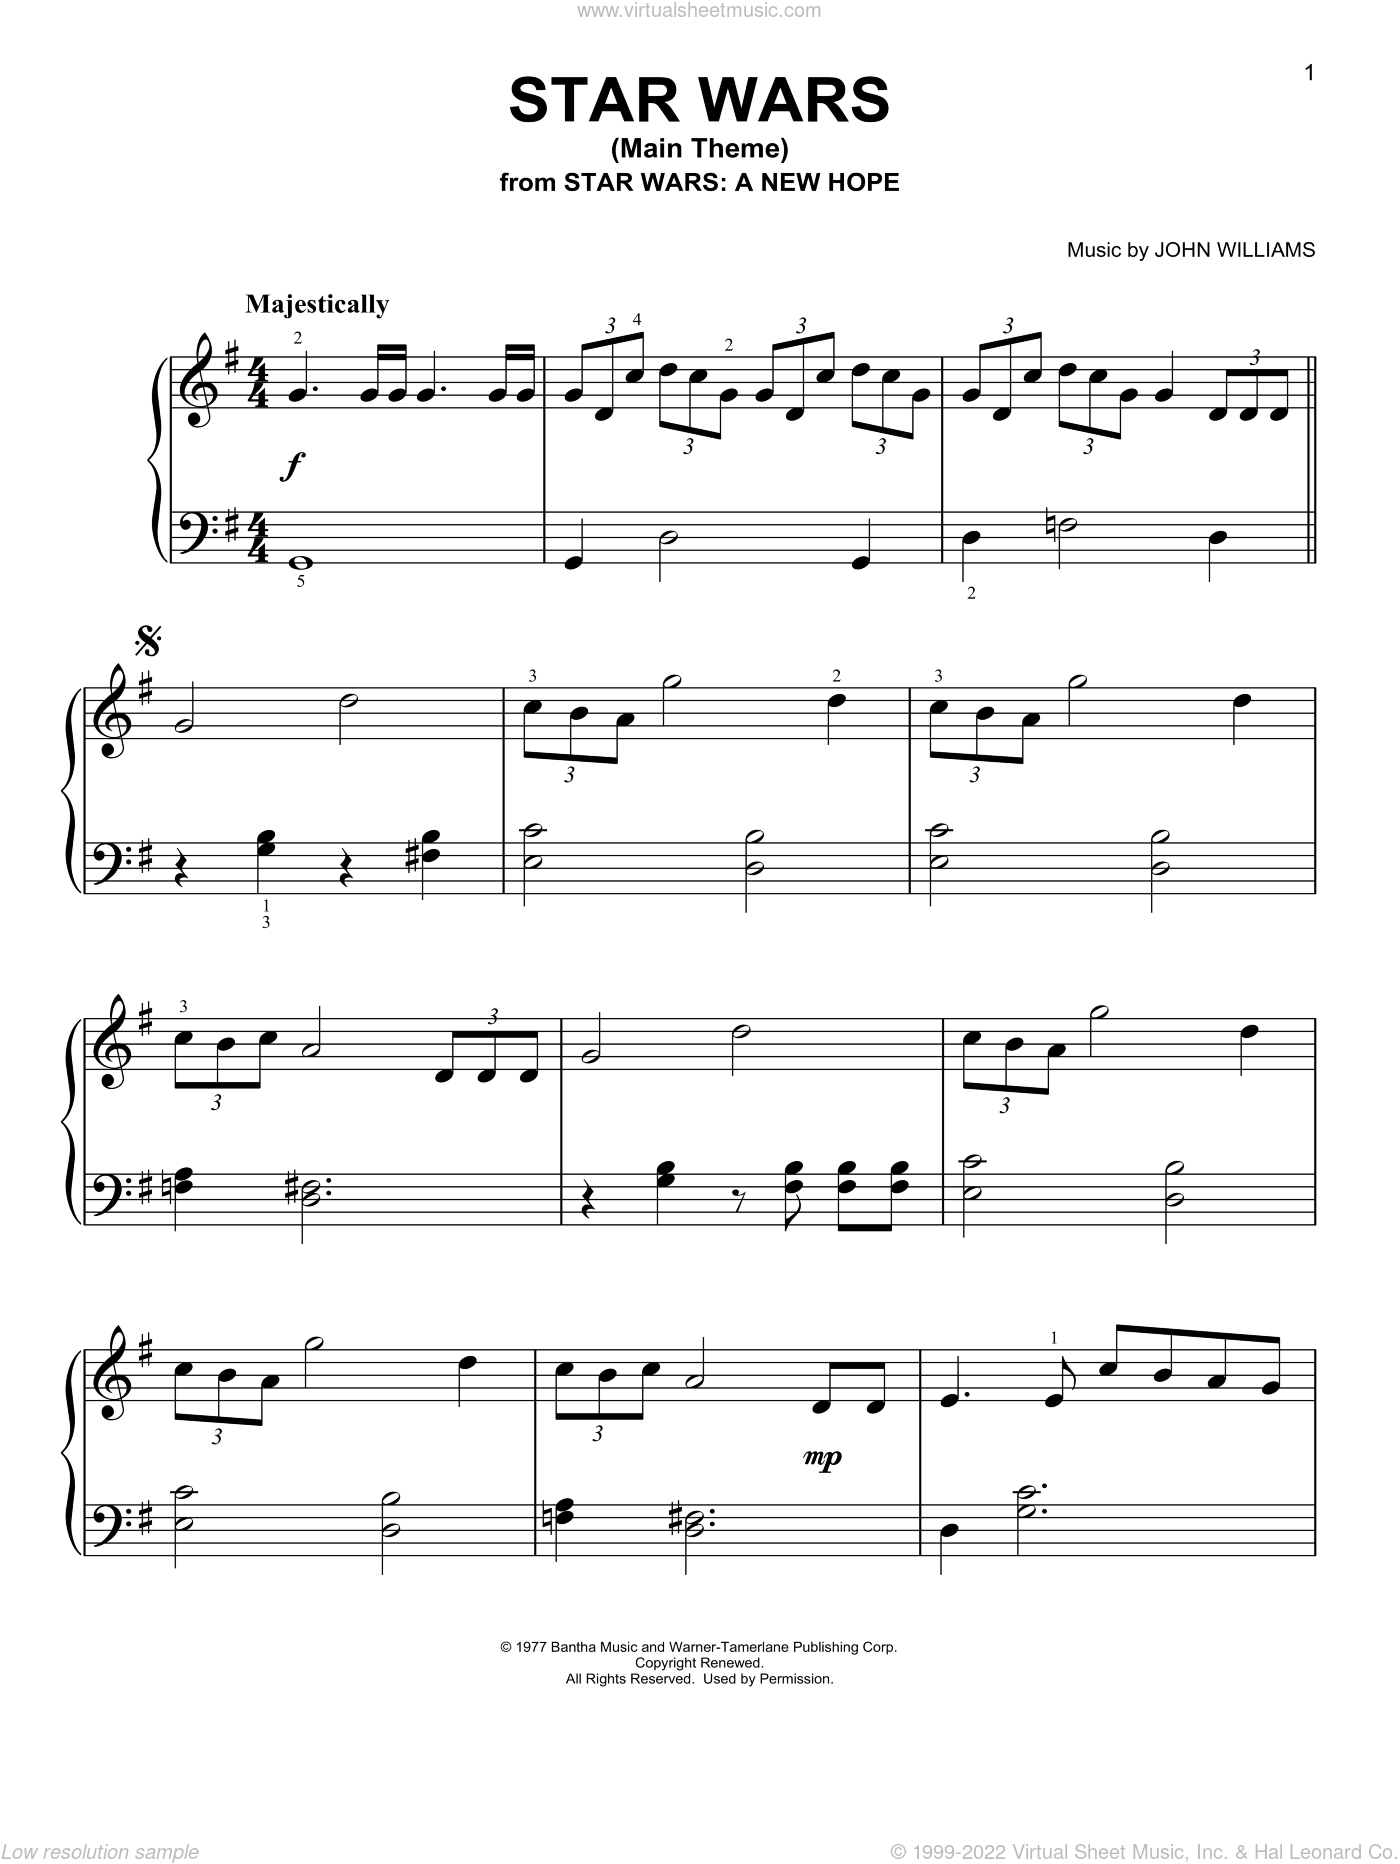 Williams - Star Wars (Main Theme), (easy) sheet music for piano solo